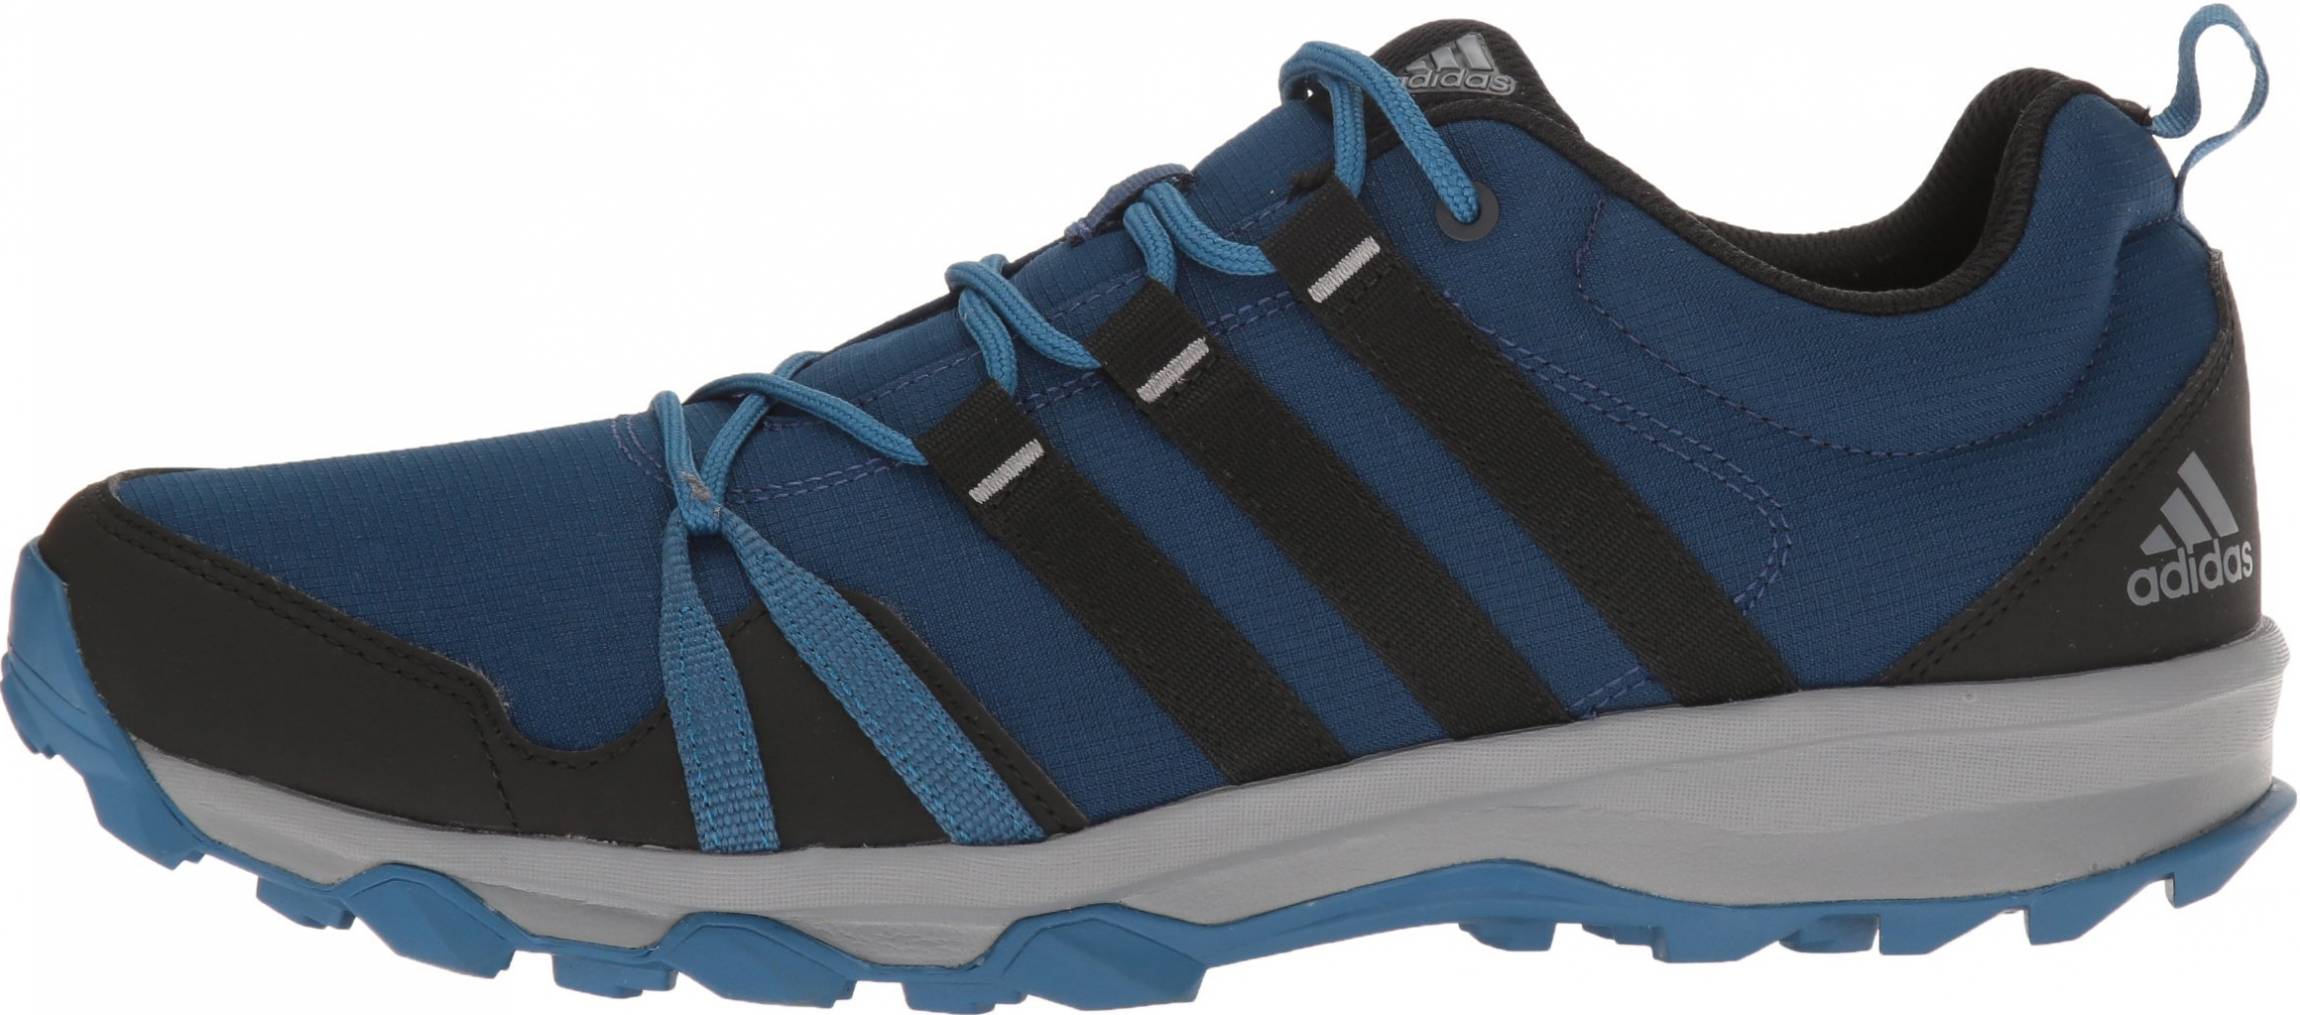 Only $80 + Review of Adidas Tracerocker | RunRepeat